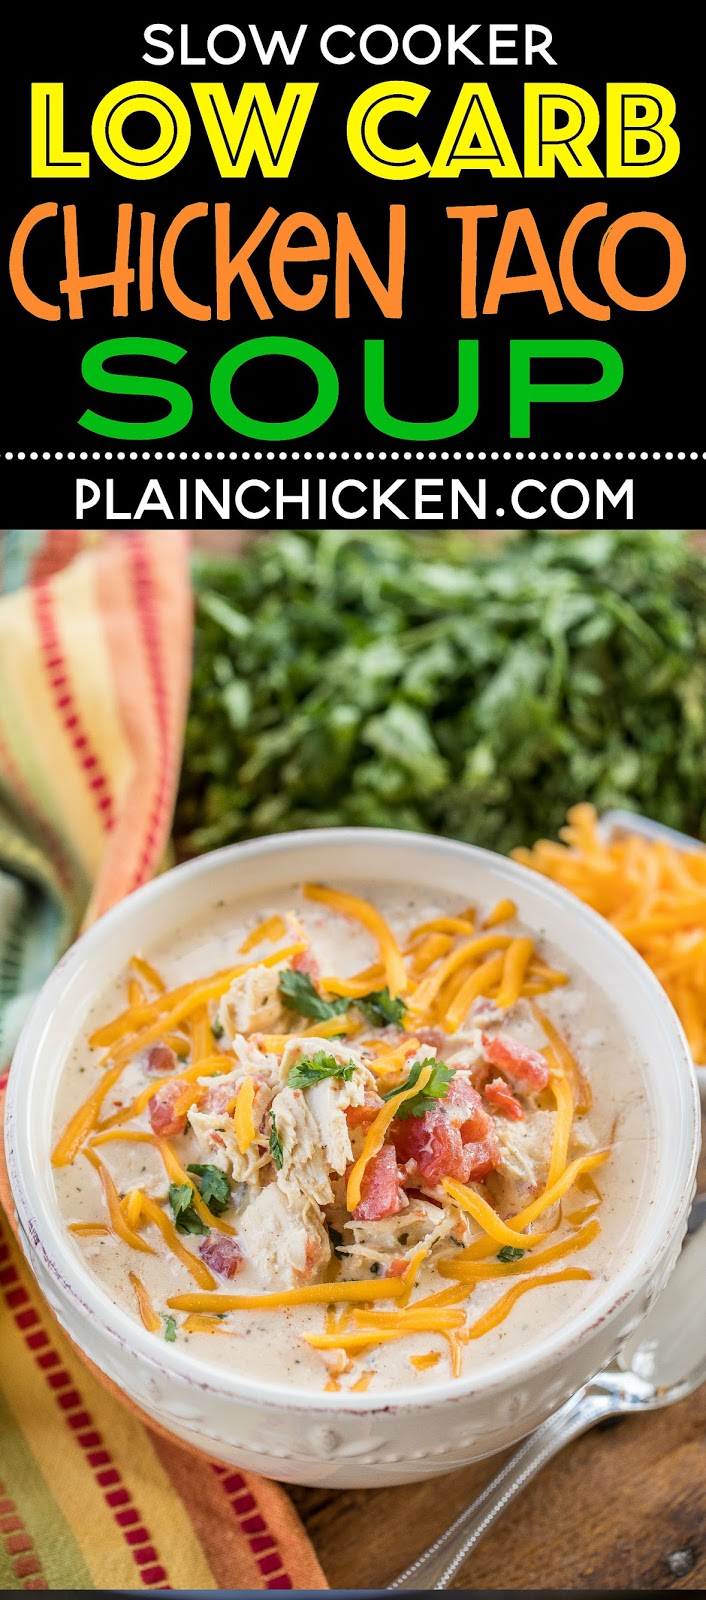 Slow Cooker LOW CARB Chicken Taco Soup | Plain Chicken